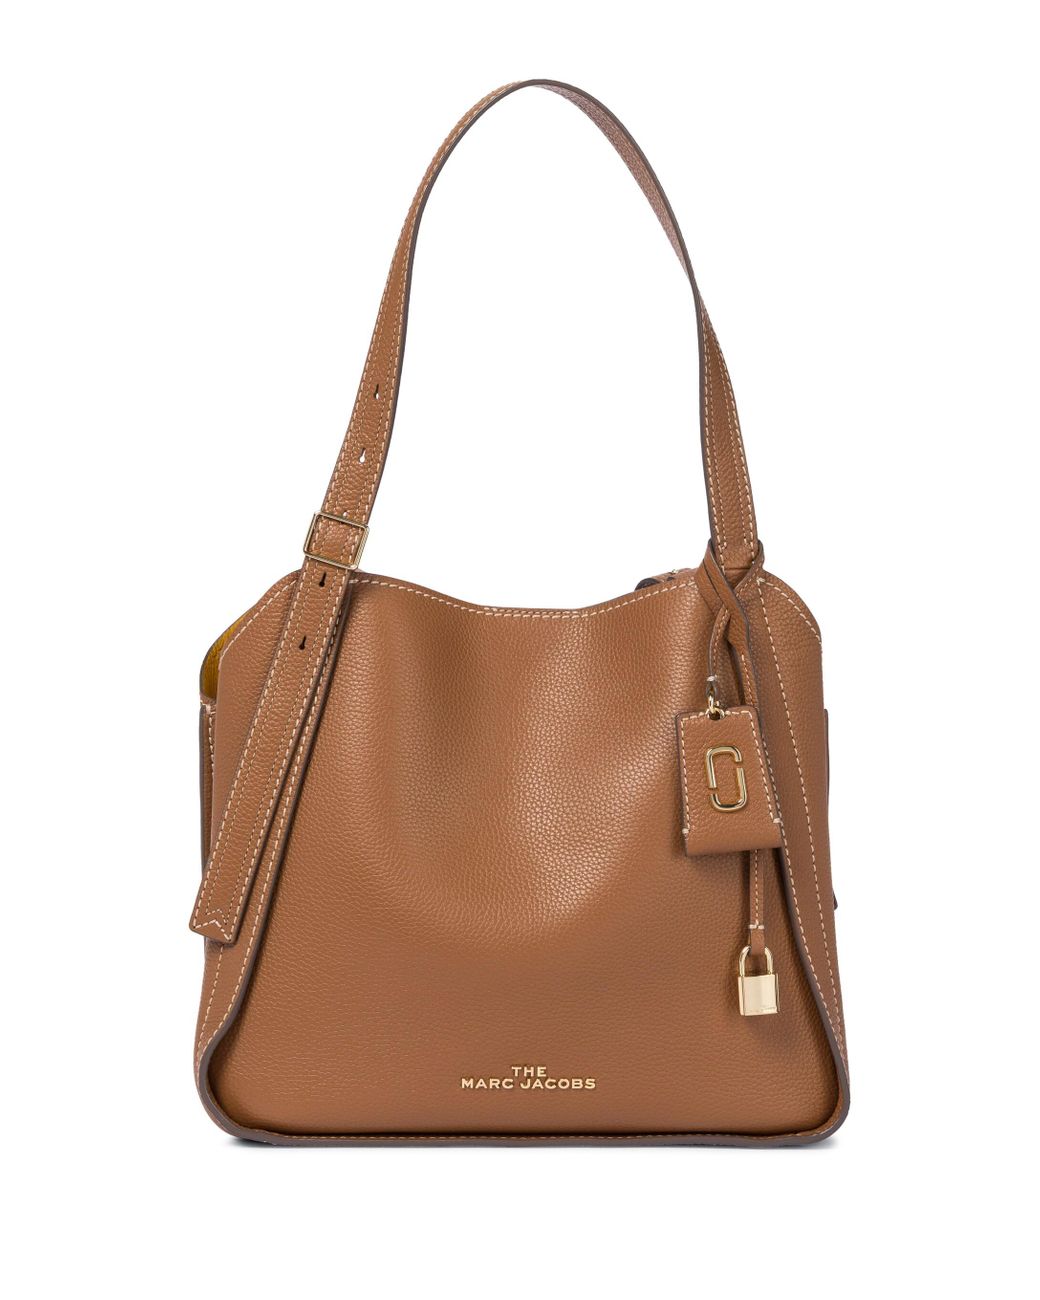 Marc Jacobs The Director Leather Shoulder Bag in Brown - Lyst